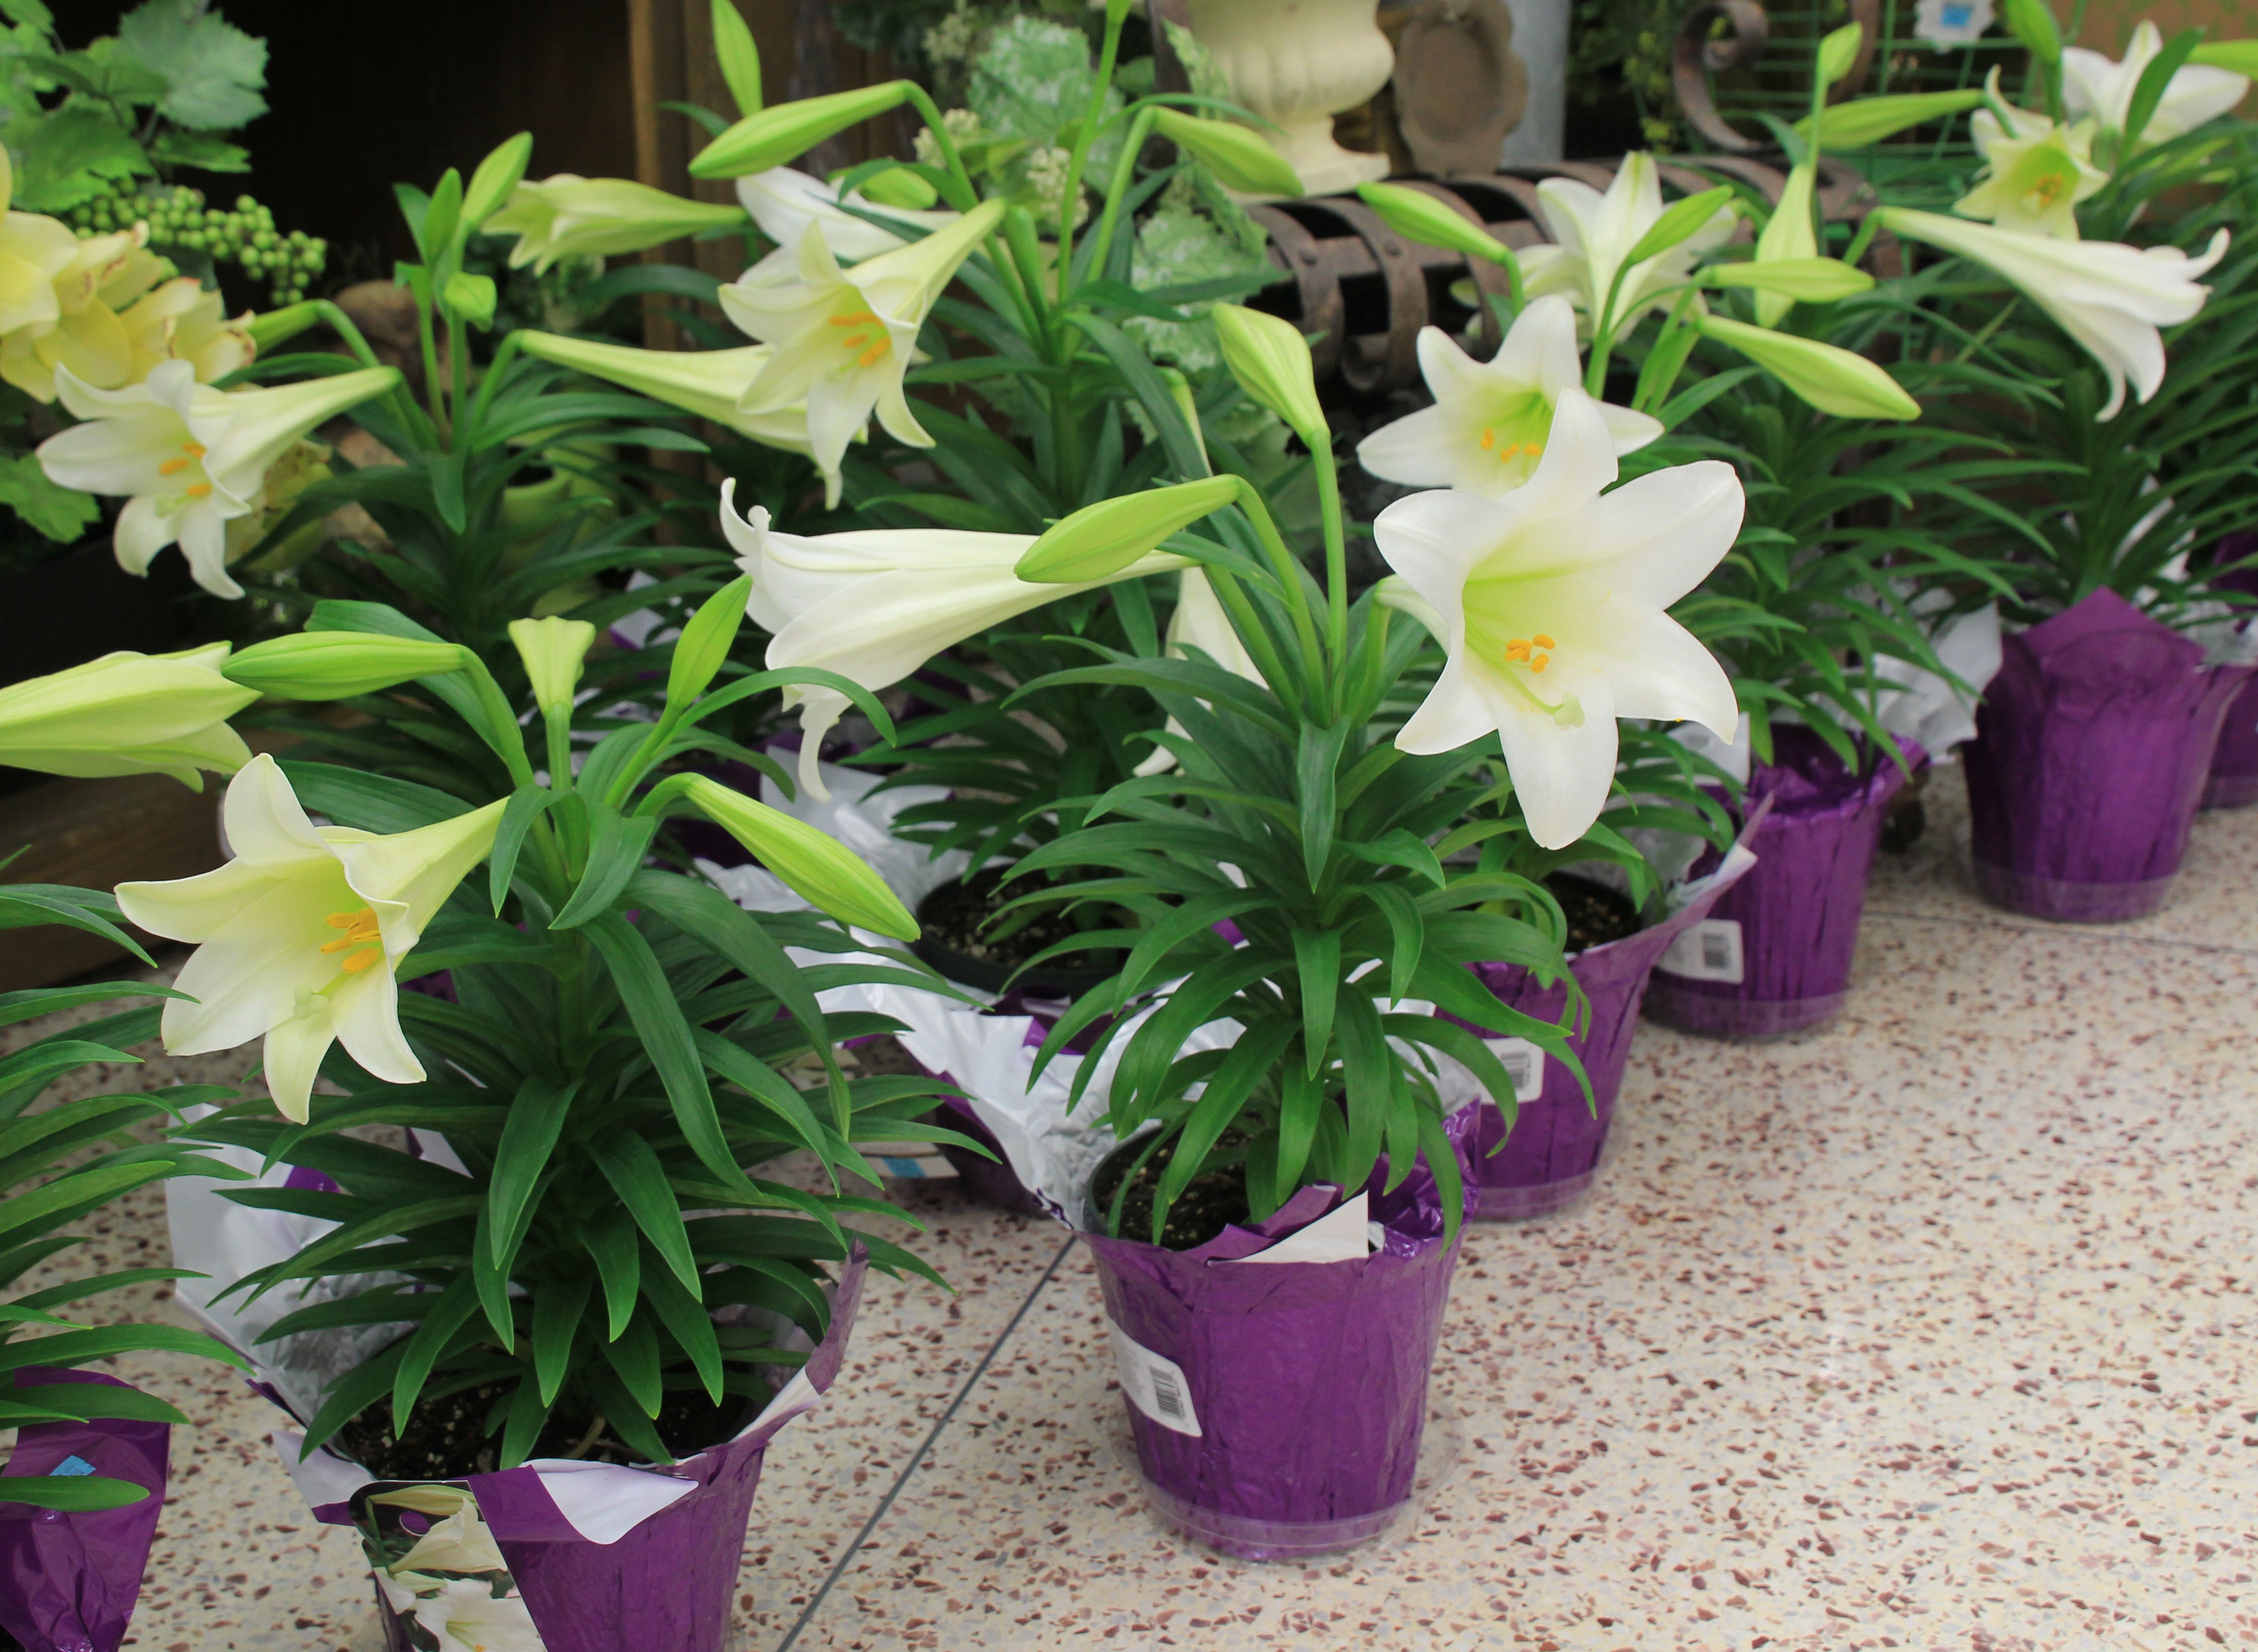 Several Easter lilies in purple pots lined up in a store